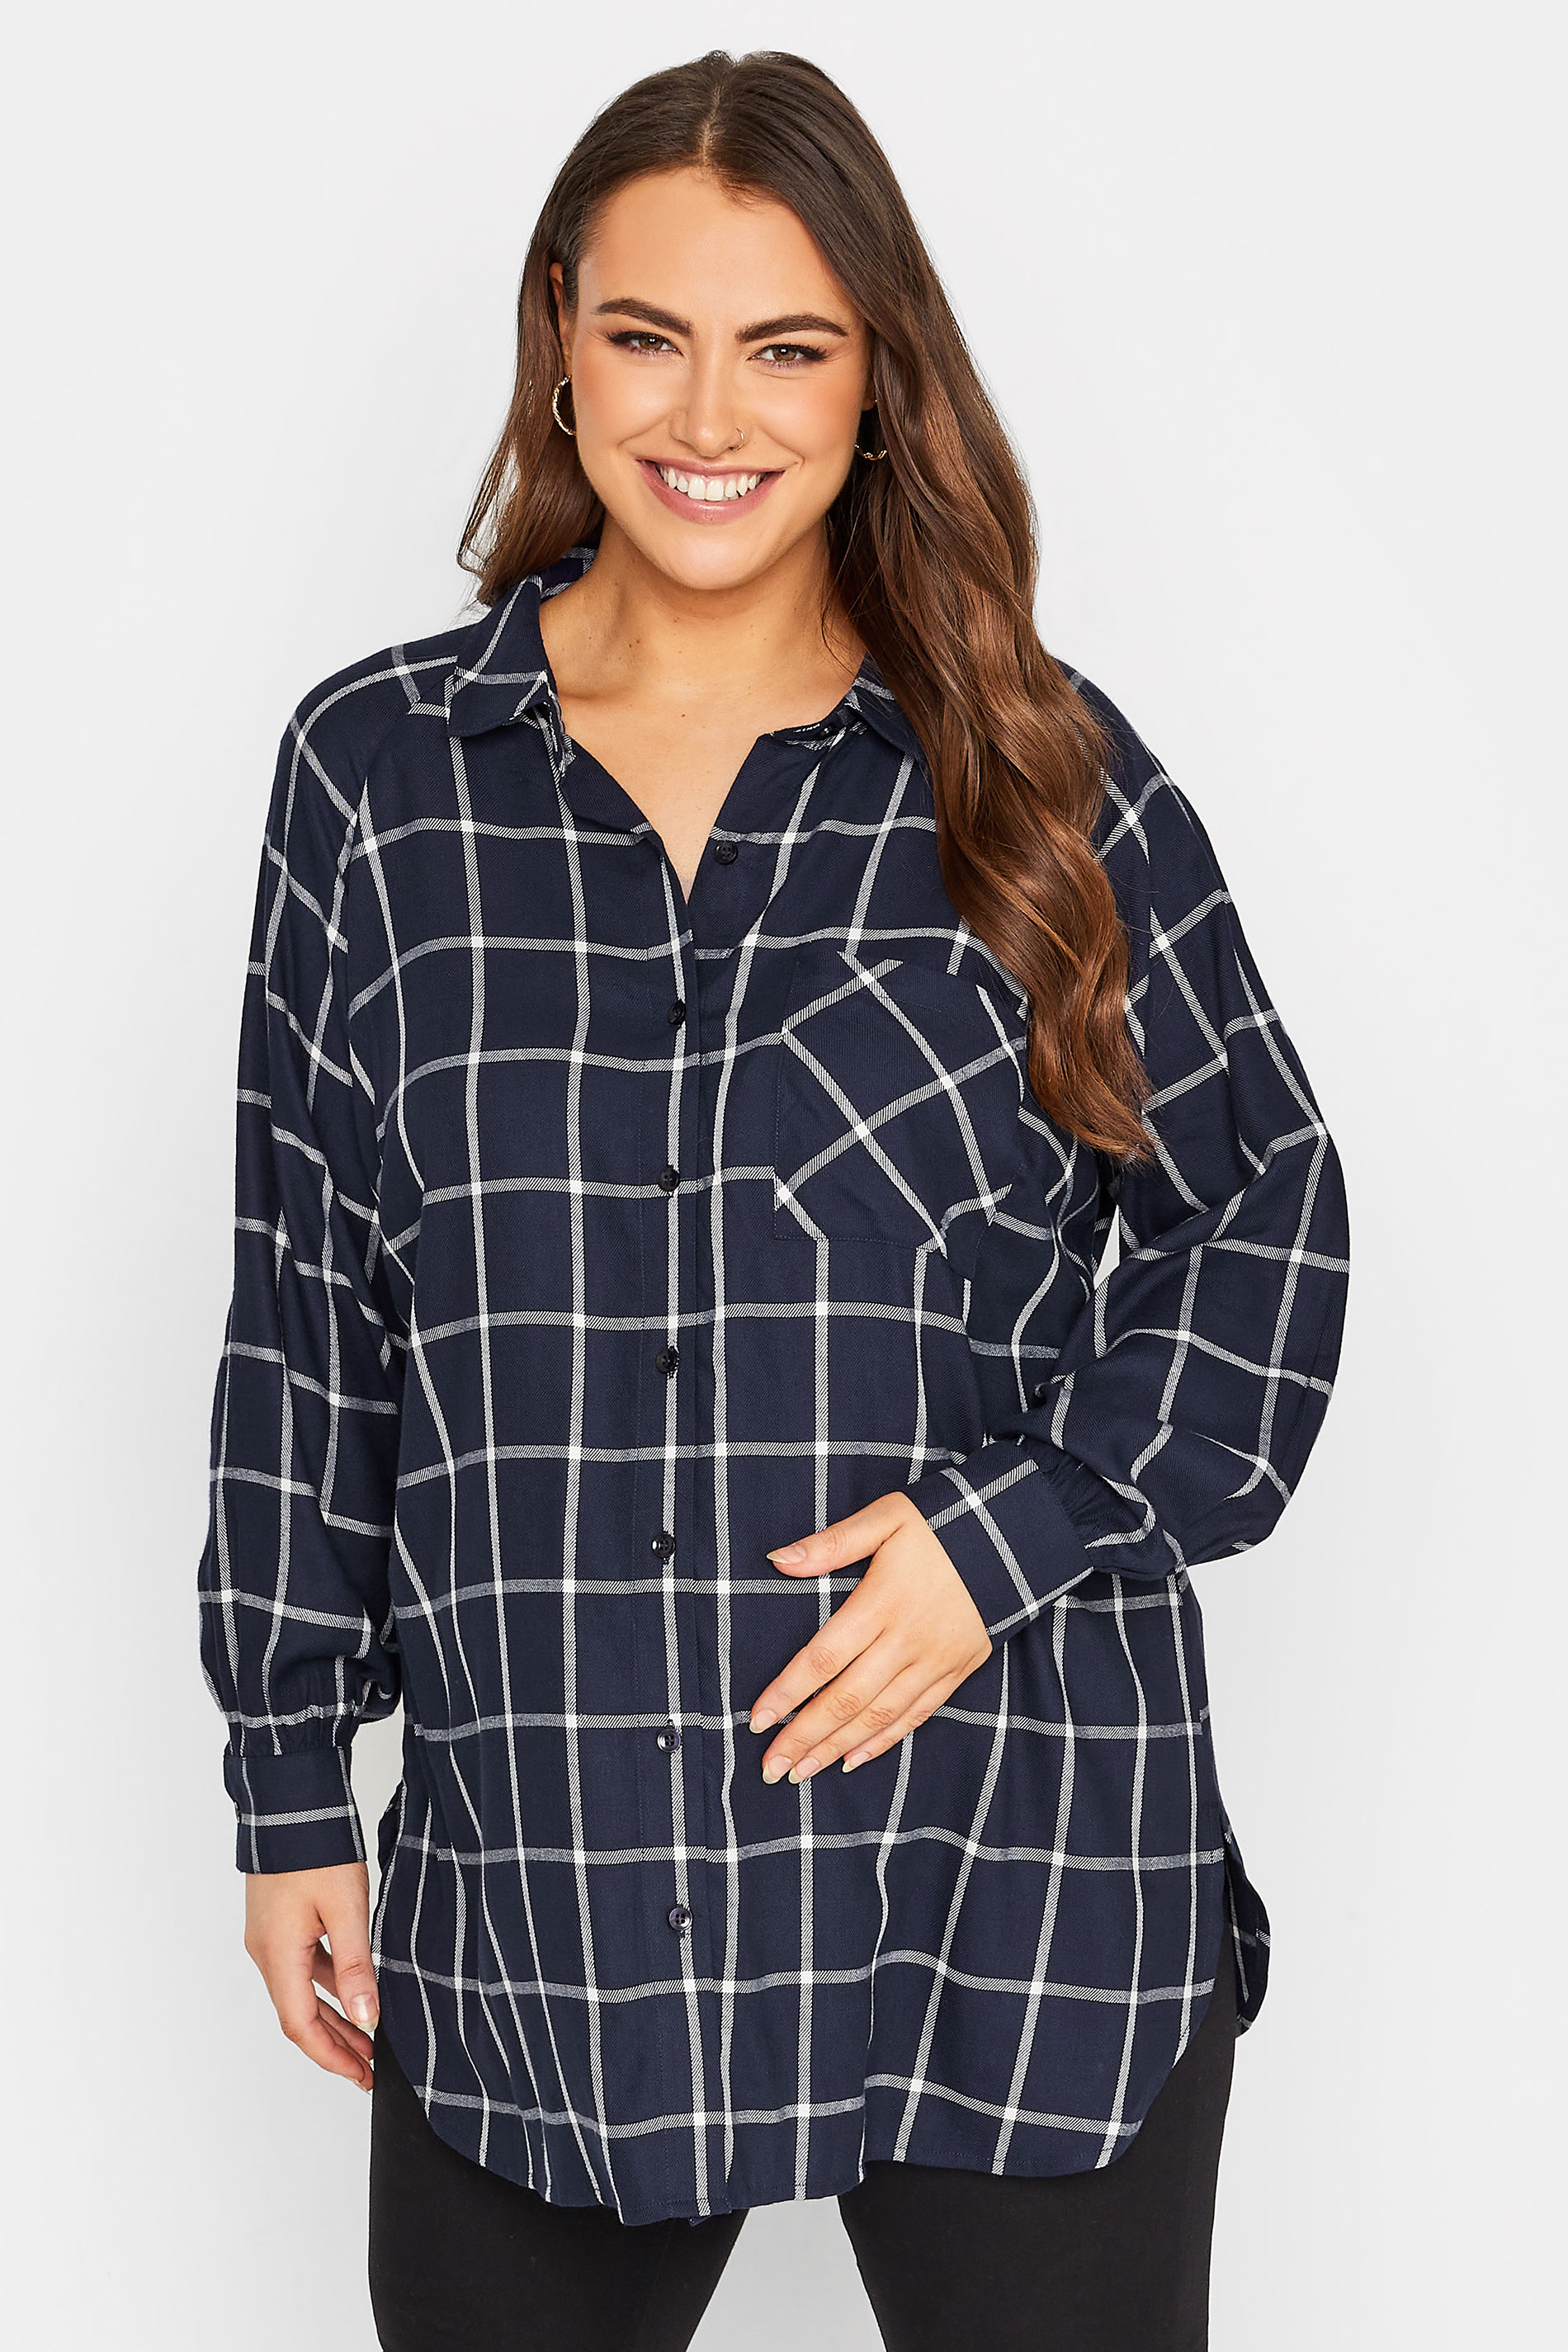 BUMP IT UP MATERNITY Plus Size Navy Blue Check Long Sleeve Shirt | Yours Clothing 1